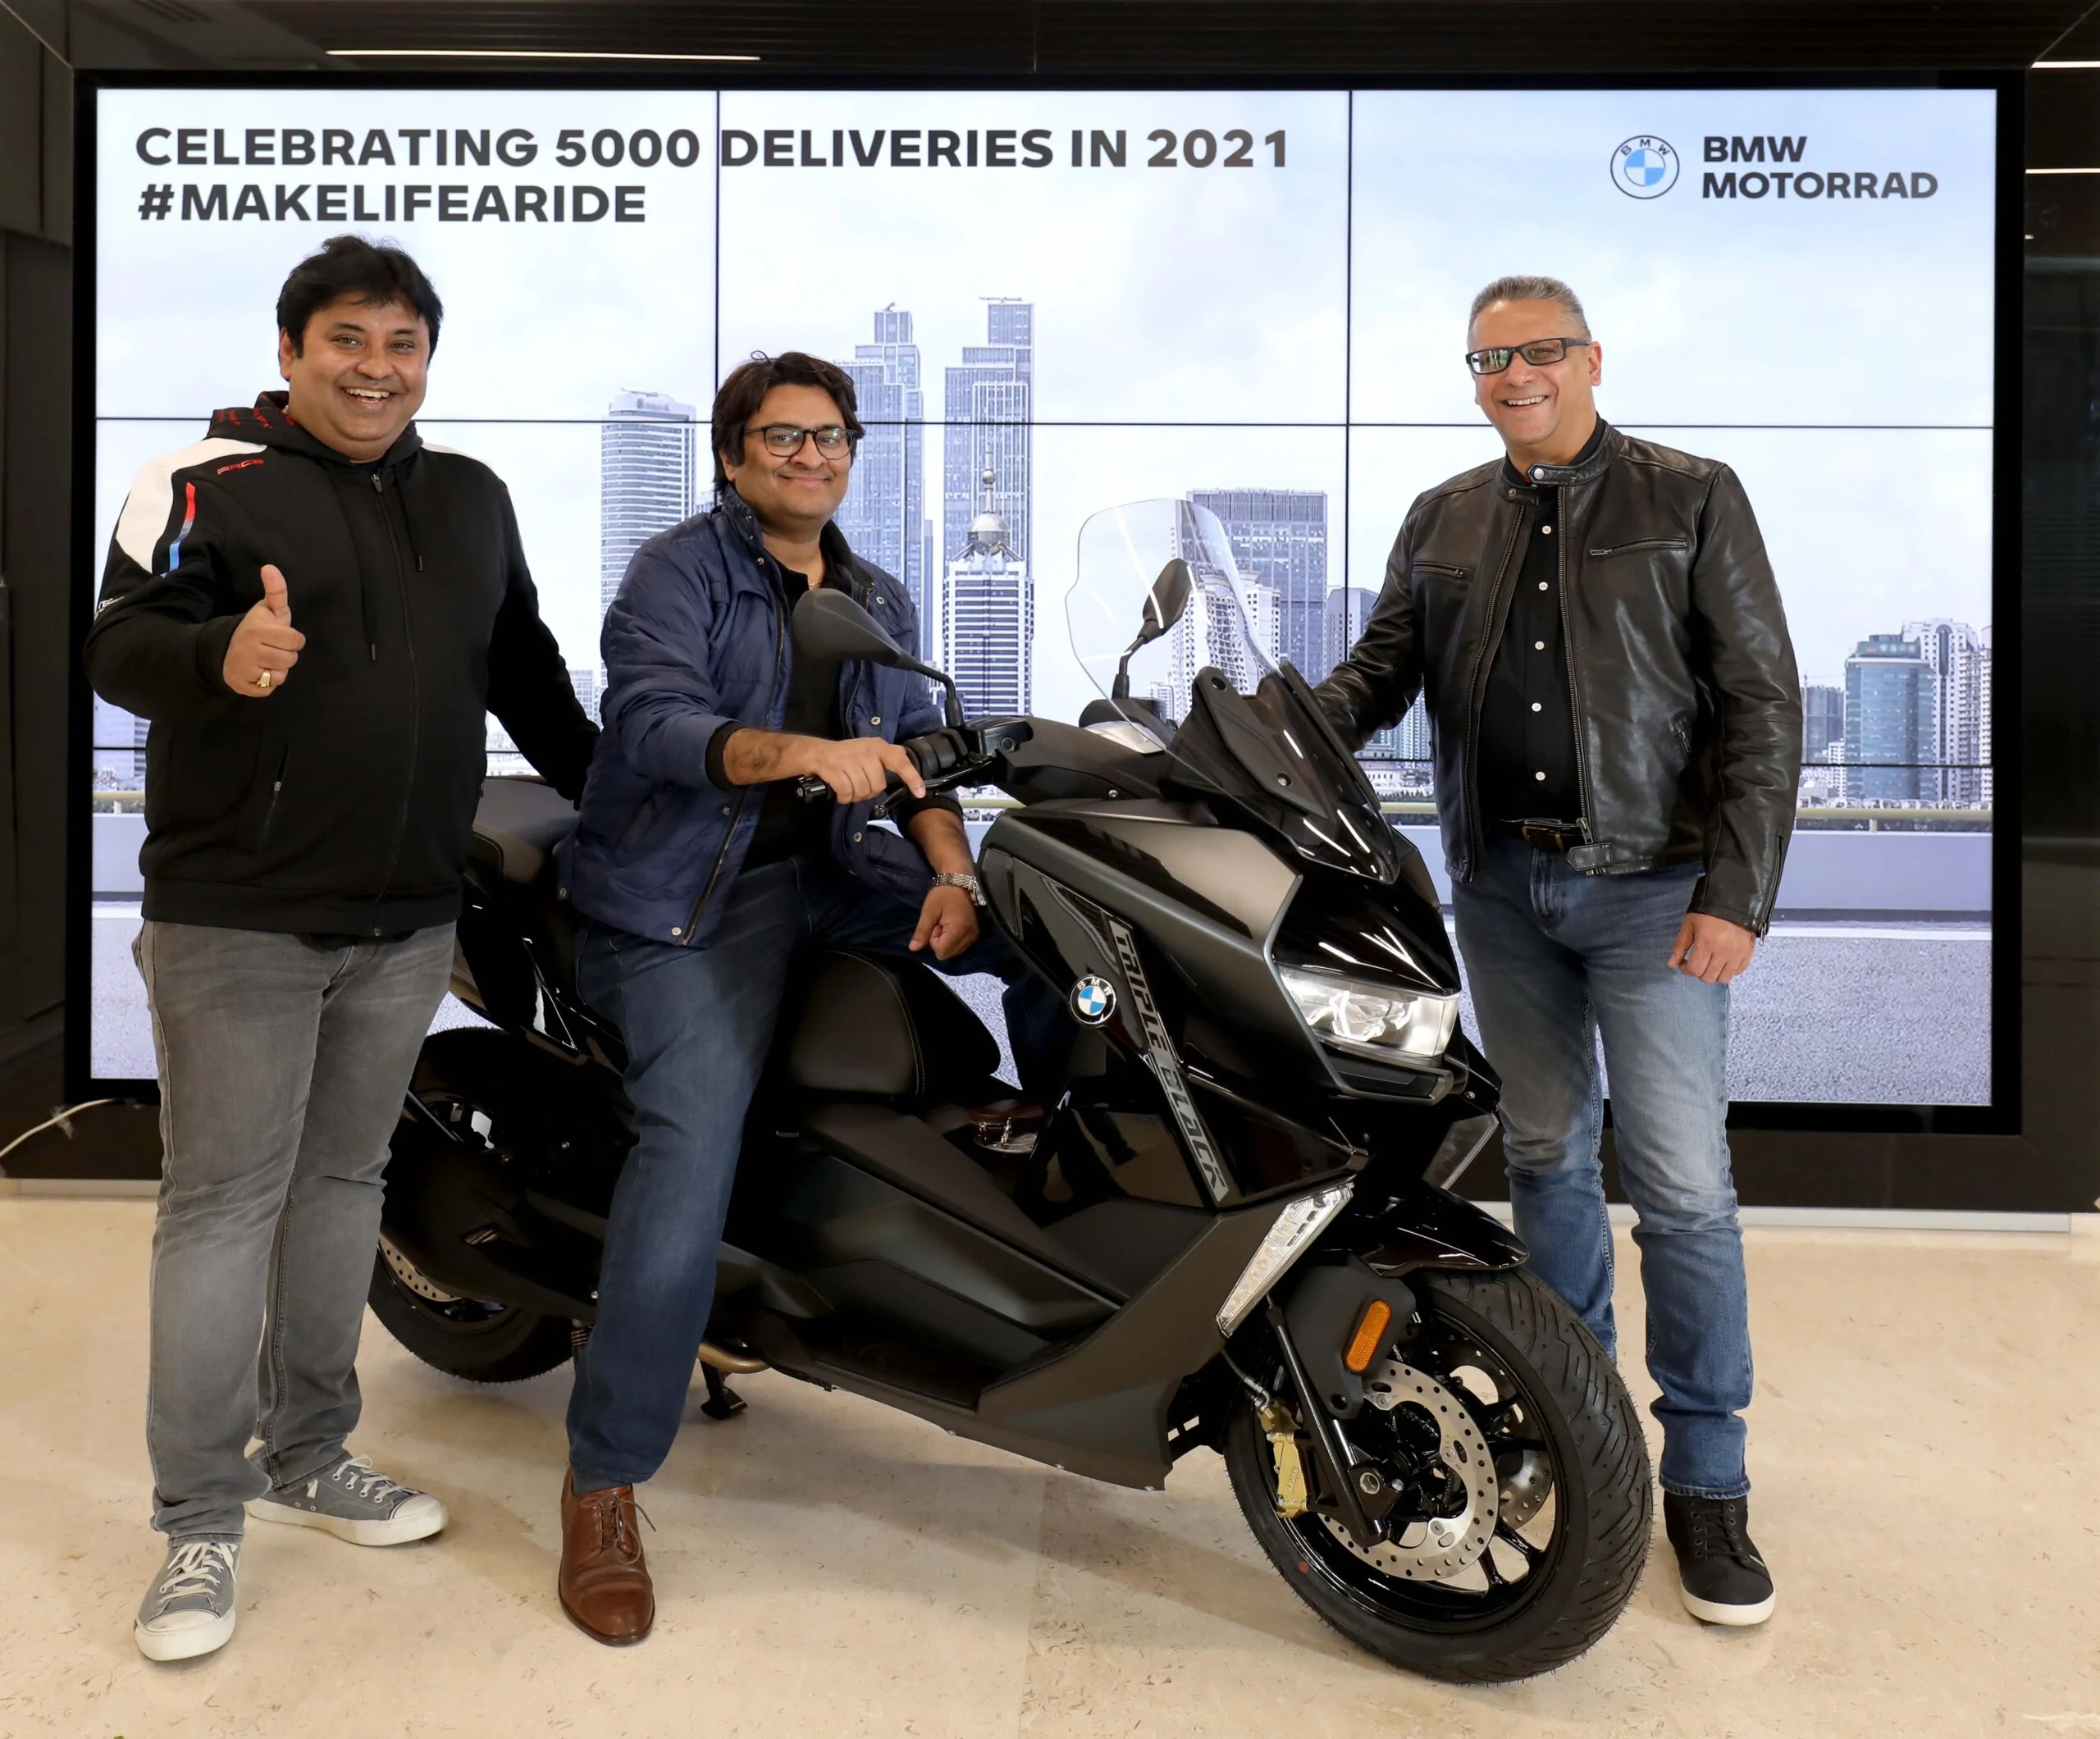 2021 BMW Motorrad Sales Stand At 5000 Units Being Sold - A New Record